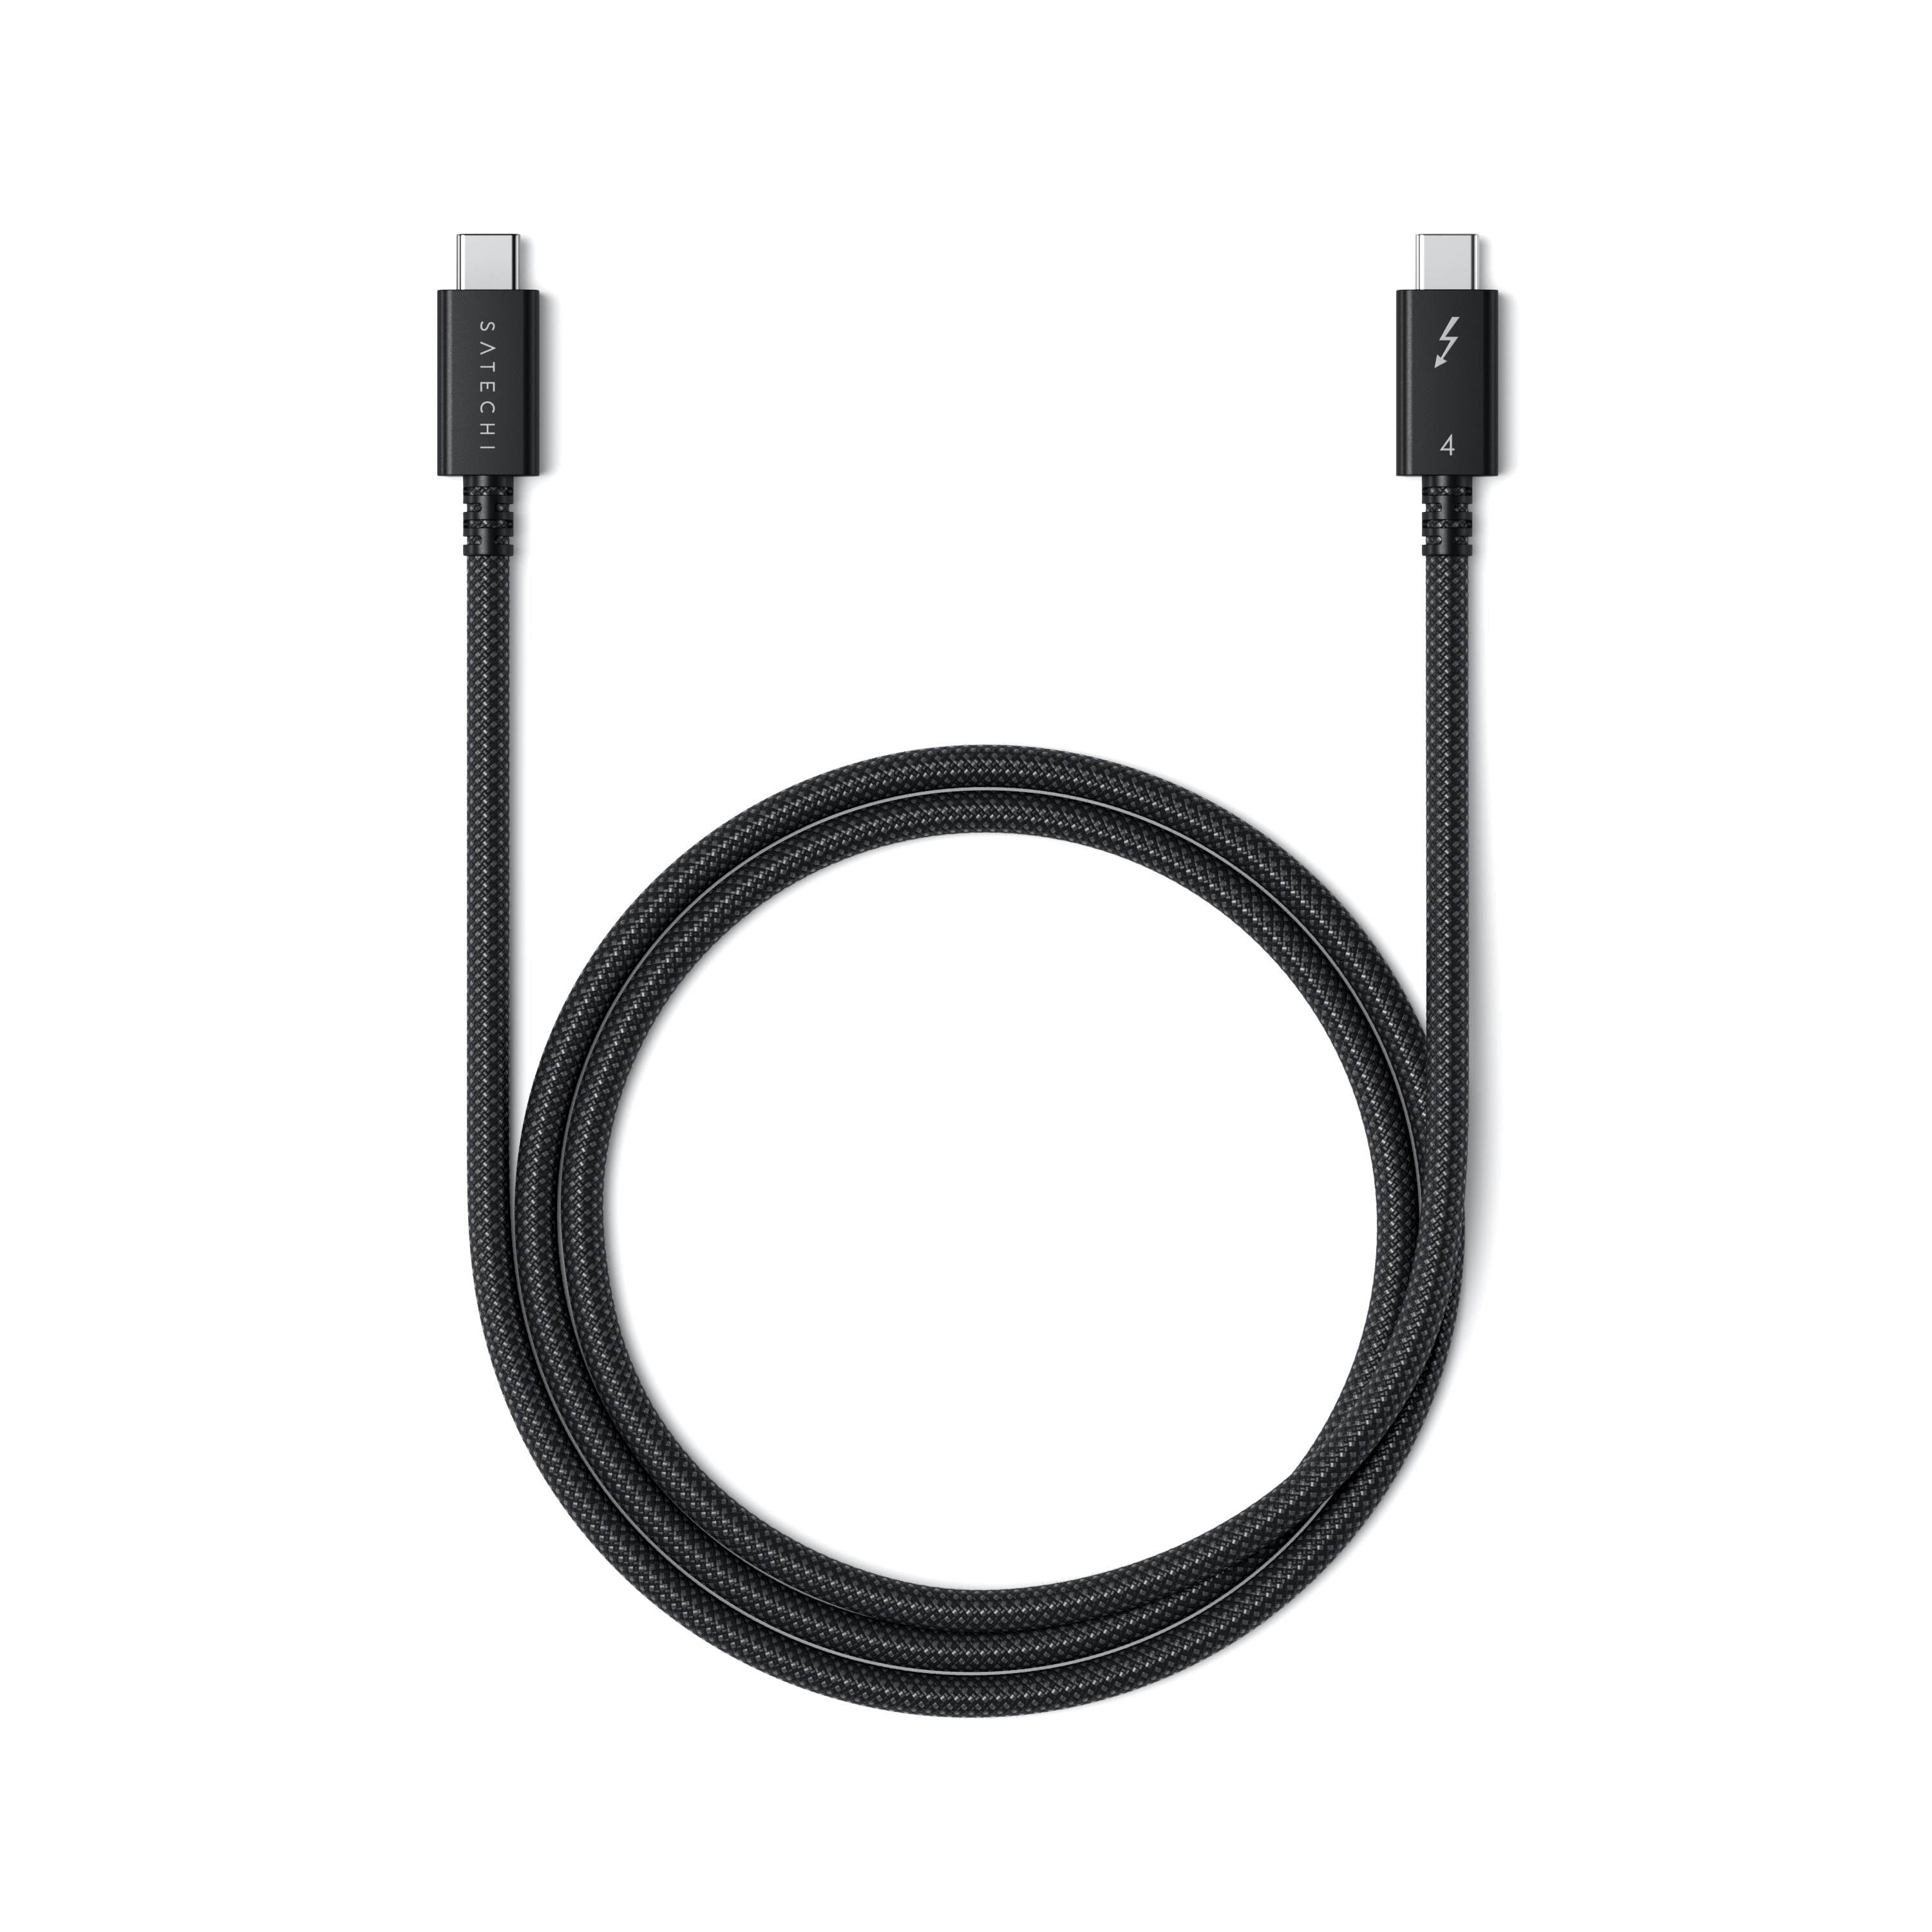 the satechi thunderbolt 4 pro cable